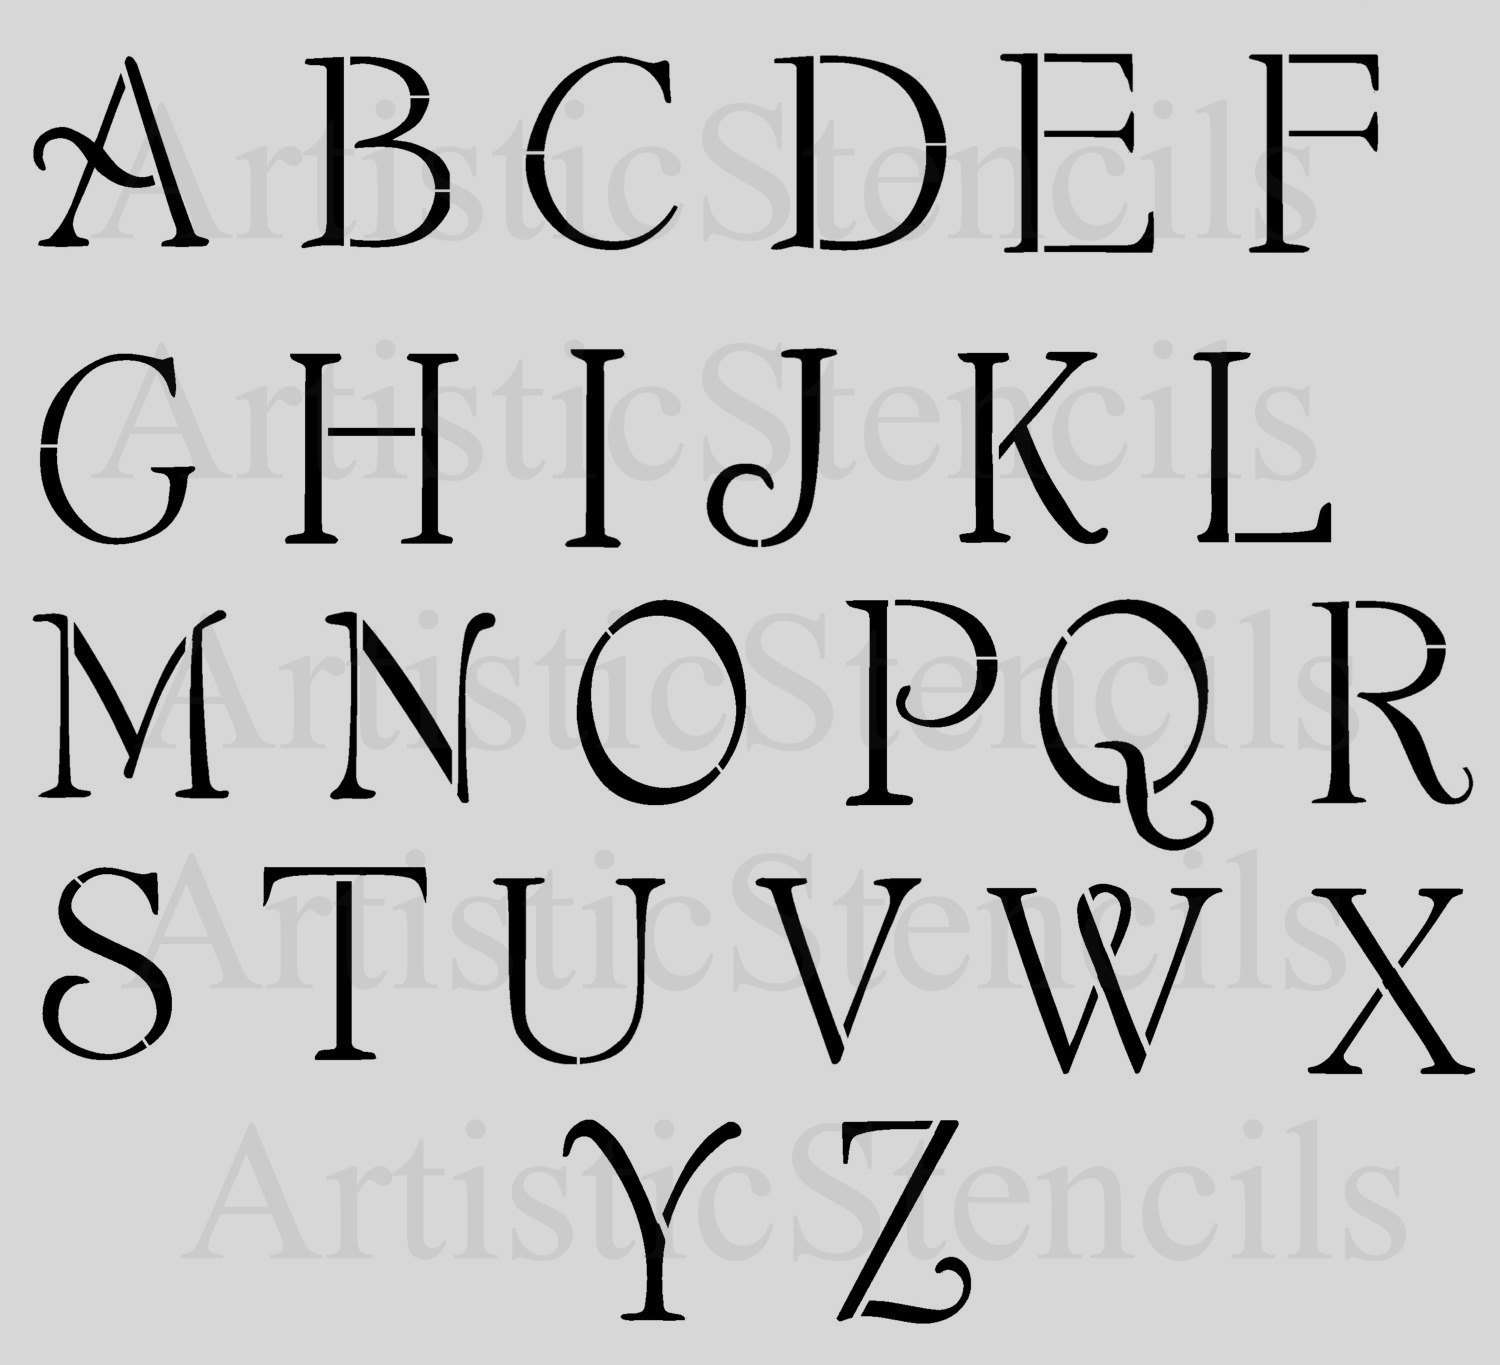 7 Best Images Of 2 Inch Alphabet Stencils Printable 2 Inch Letter